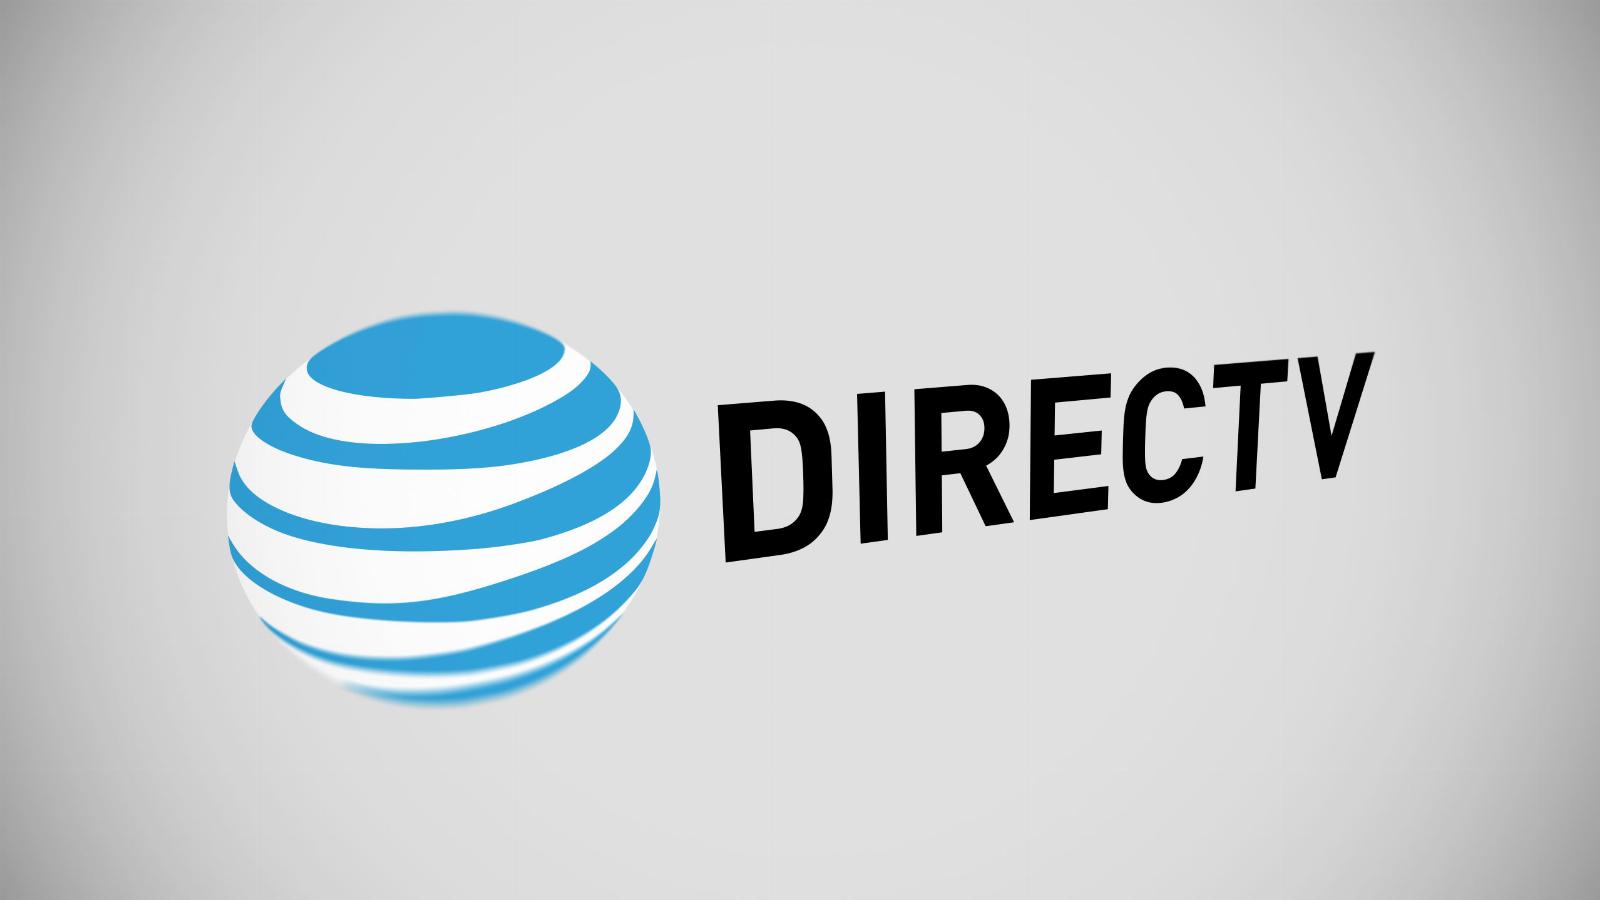 DirecTV is the latest pay-TV company to lay off staff amid the ongoing shift to streaming